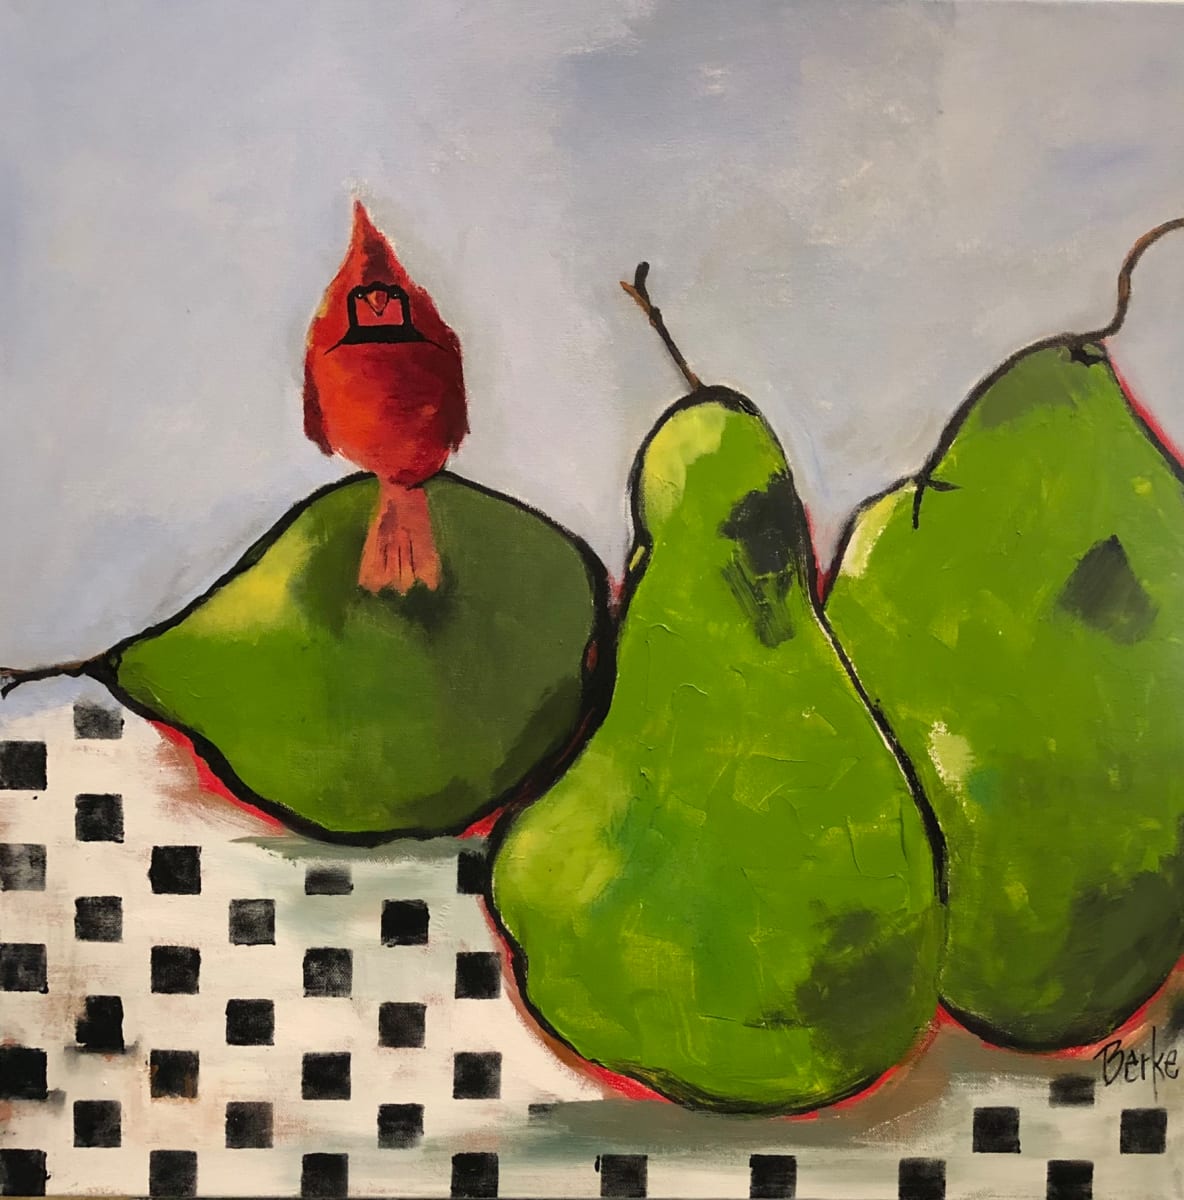 Perched Pears by jane berke  Image: Funky little bird and pears